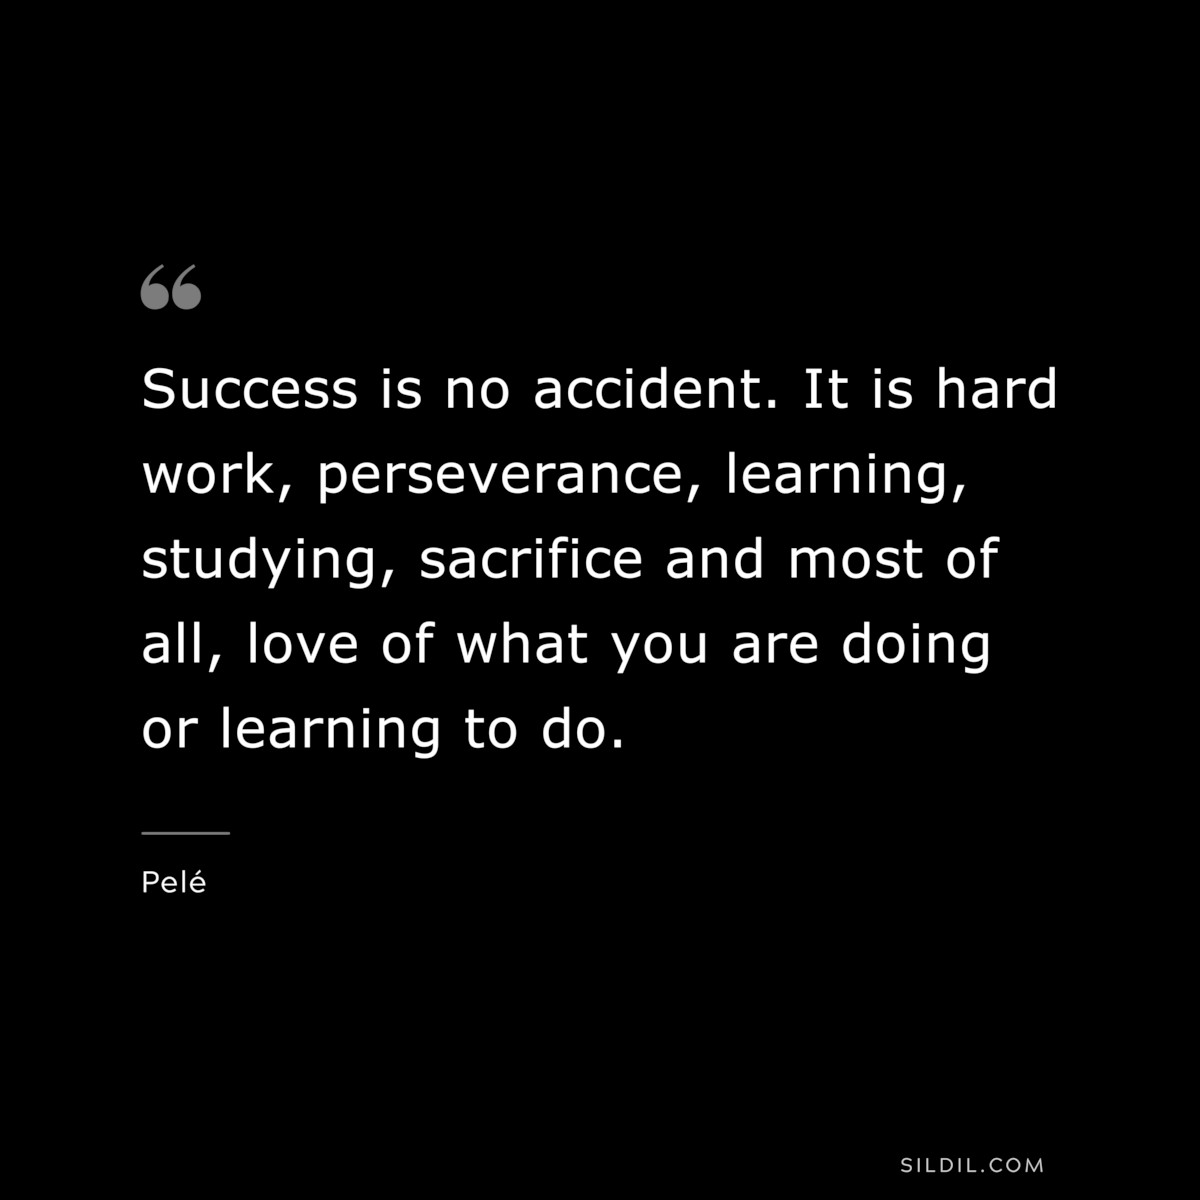 Success is no accident. It is hard work, perseverance, learning, studying, sacrifice and most of all, love of what you are doing or learning to do. ― Pelé